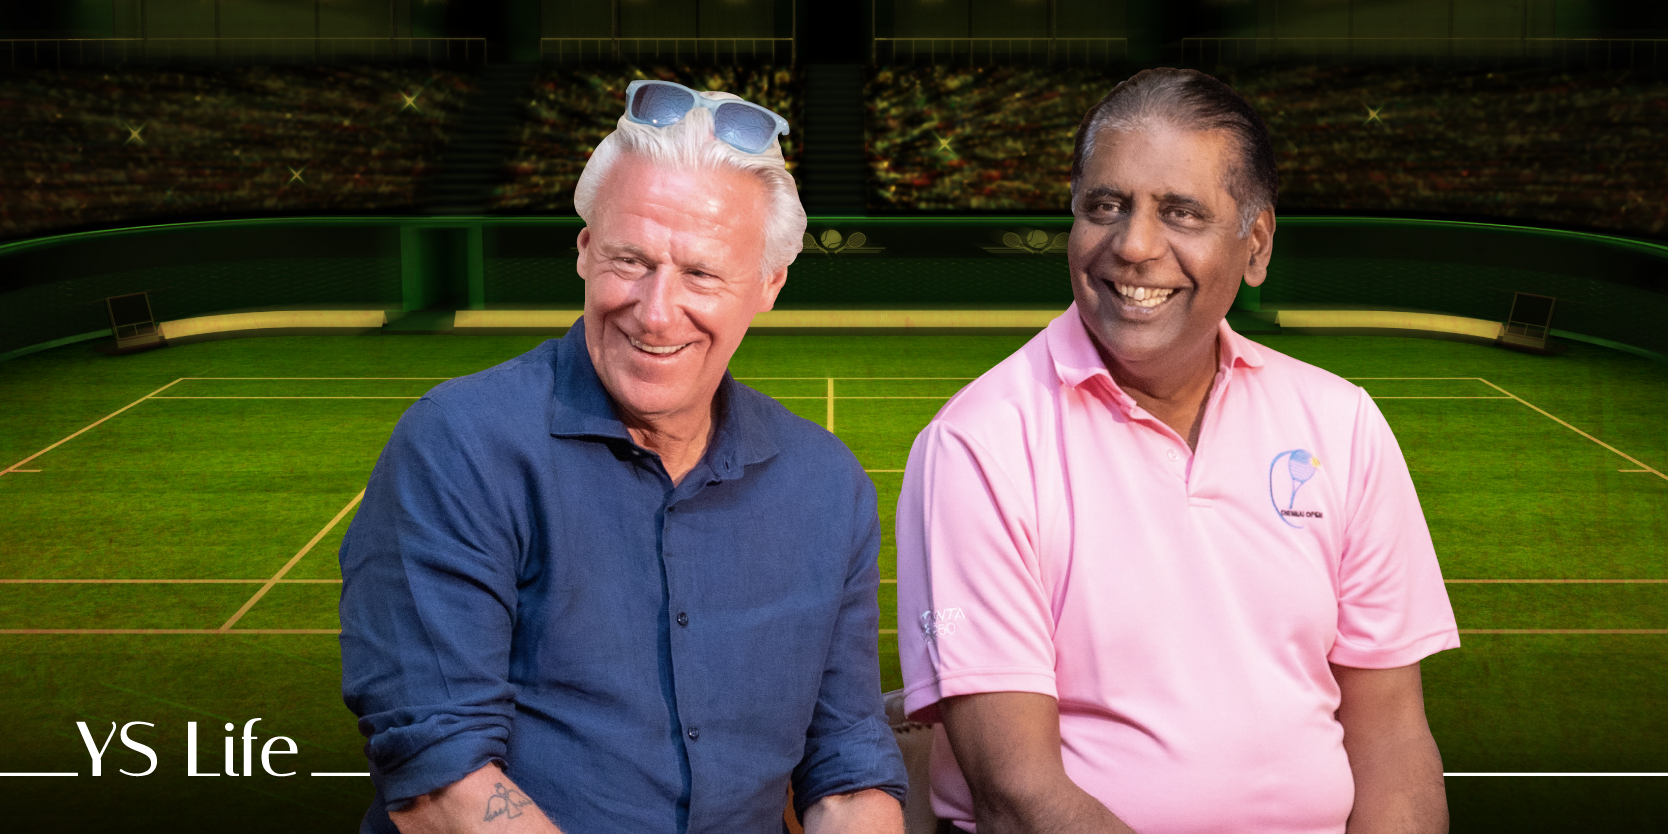 Tennis legends Bjorn Borg and Vijay Amritraj get candid about the game, their relationship and more 